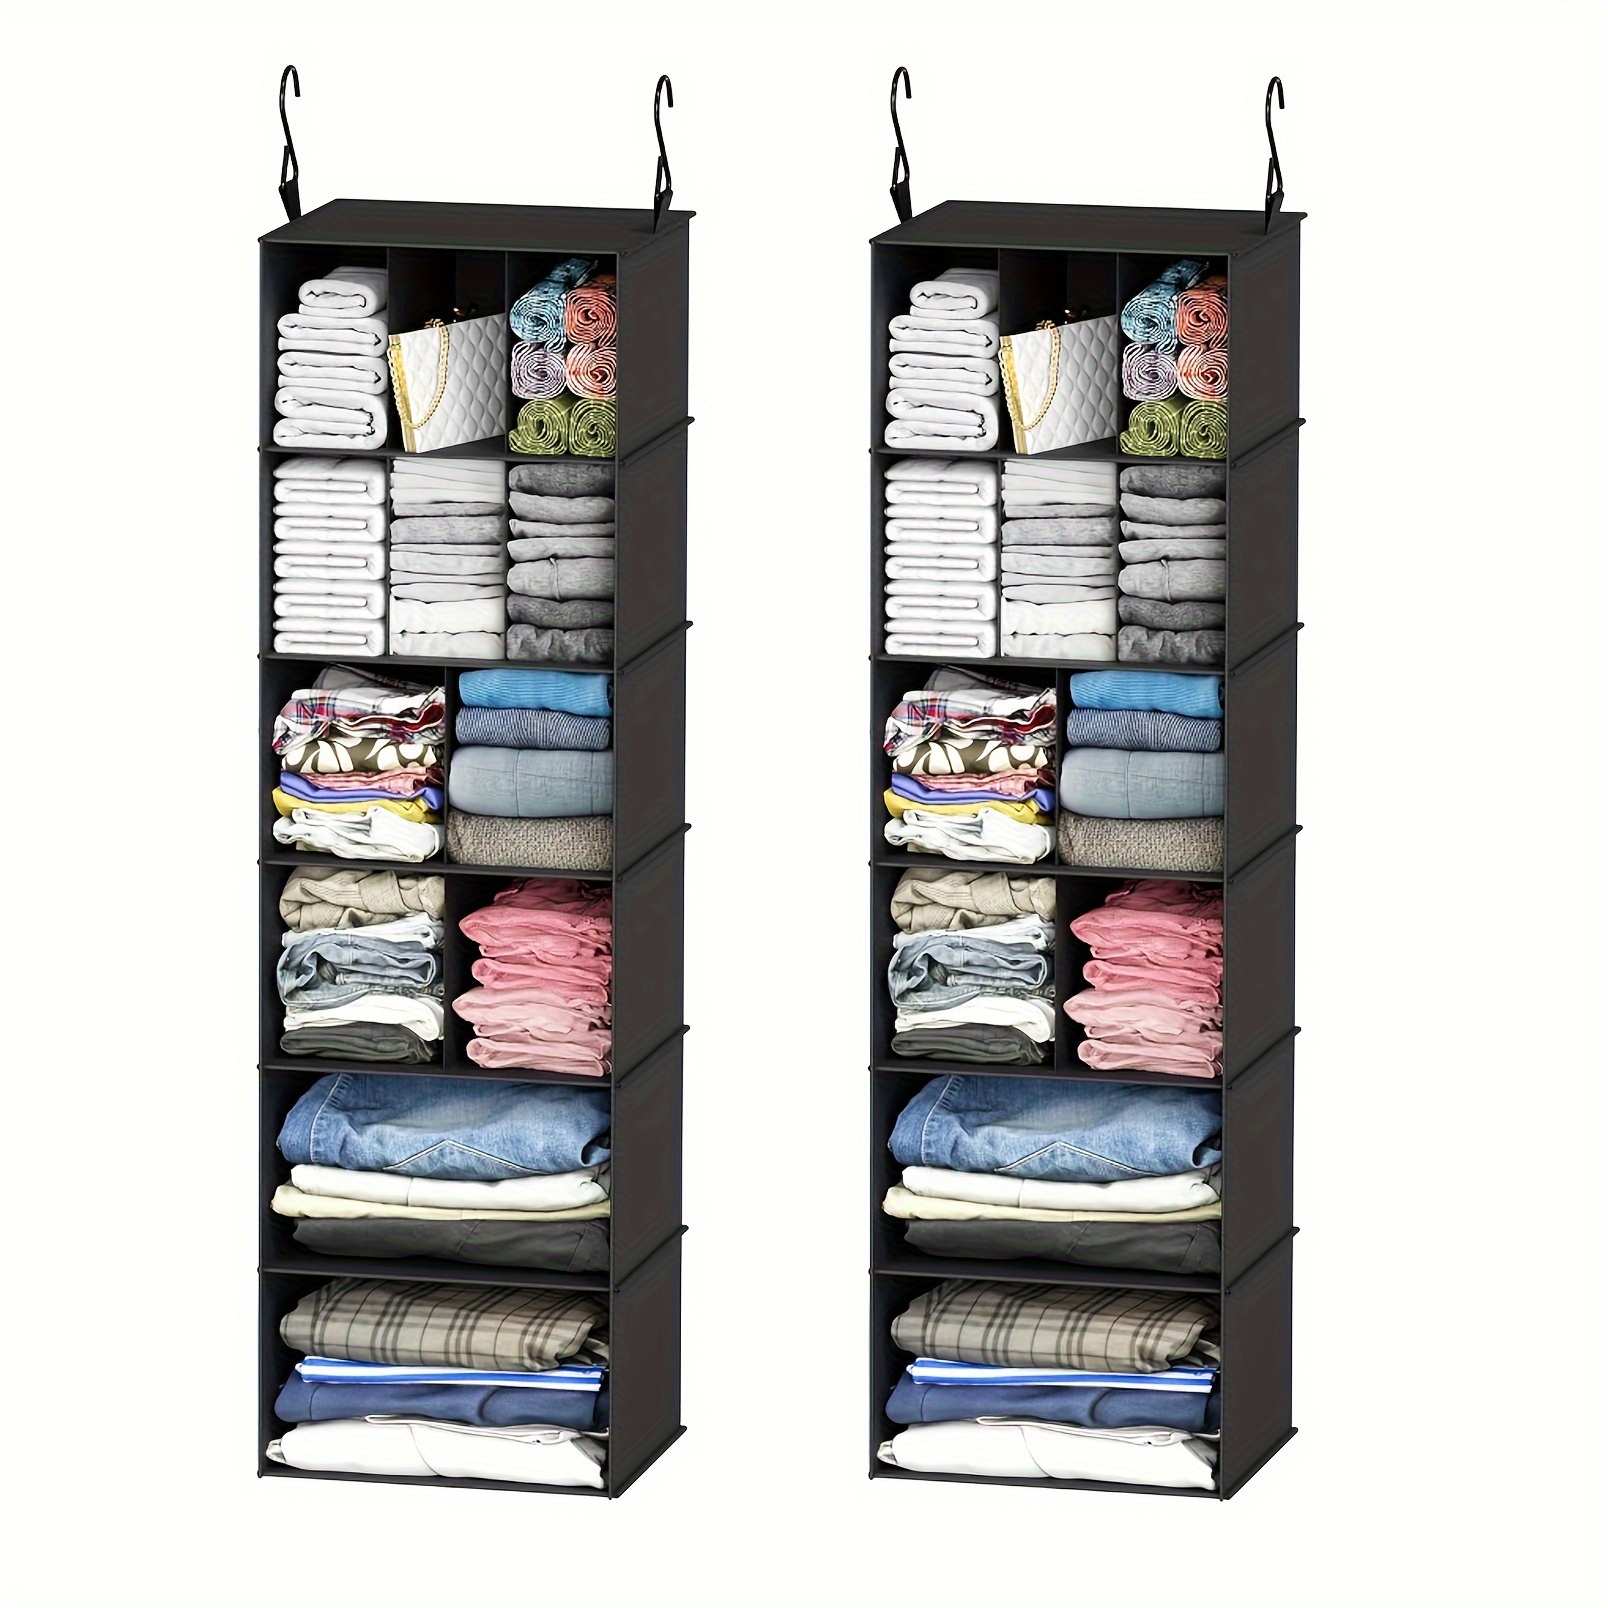 

2-piece Hanging Closet Organizer And Storage, 24 Sections Hanging Shoe Shelves For Closet, Wardrobe, Rv, Clothes Rack